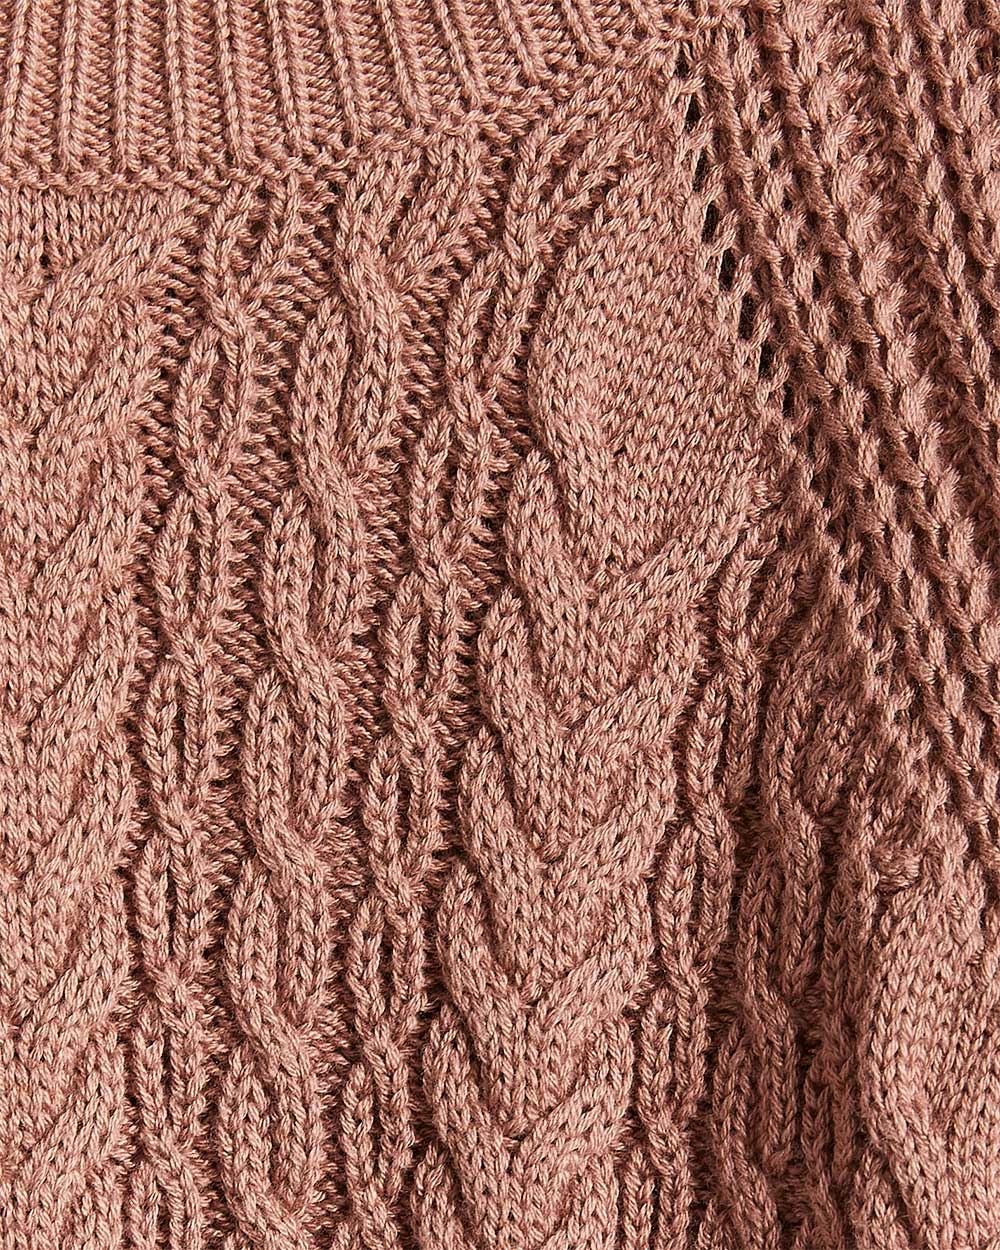 Cable Stitch Pull with Batwing Sleeves